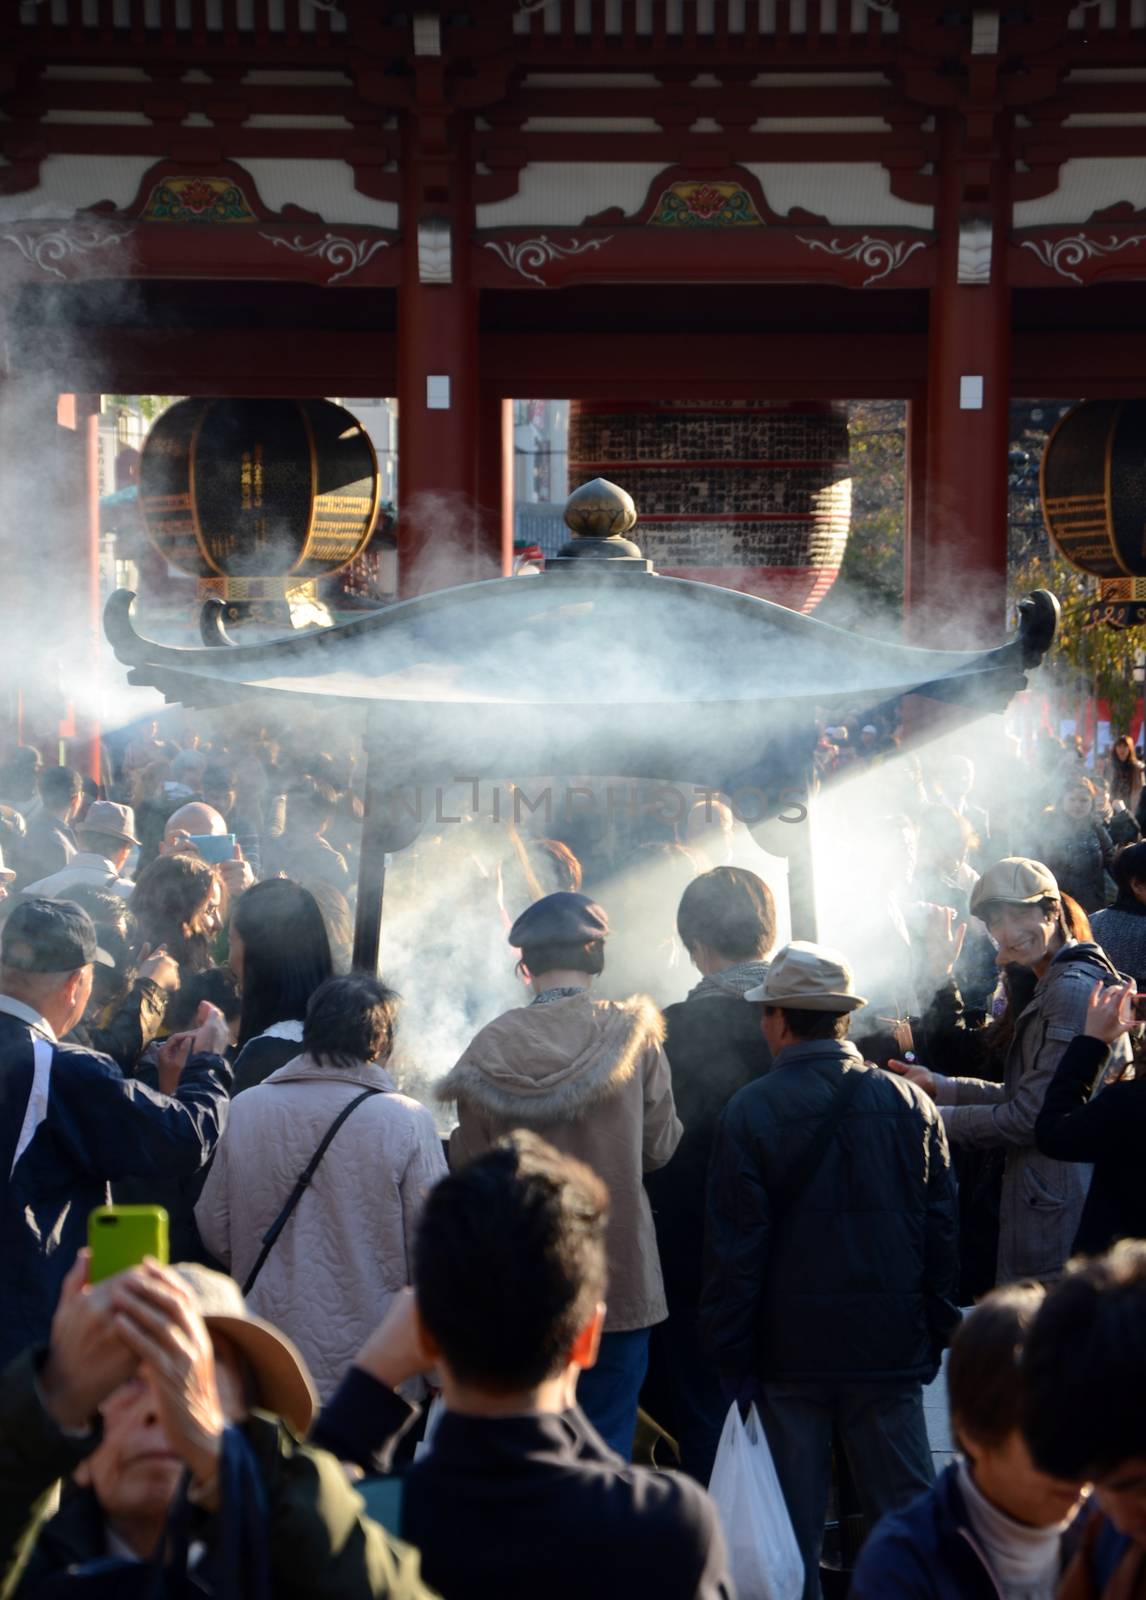 TOKYO, JAPAN - NOV 21: Buddhists gather around a fire to light incense and pray at Sensoji Temple on November 21, 2013 in Tokyo, Japan.